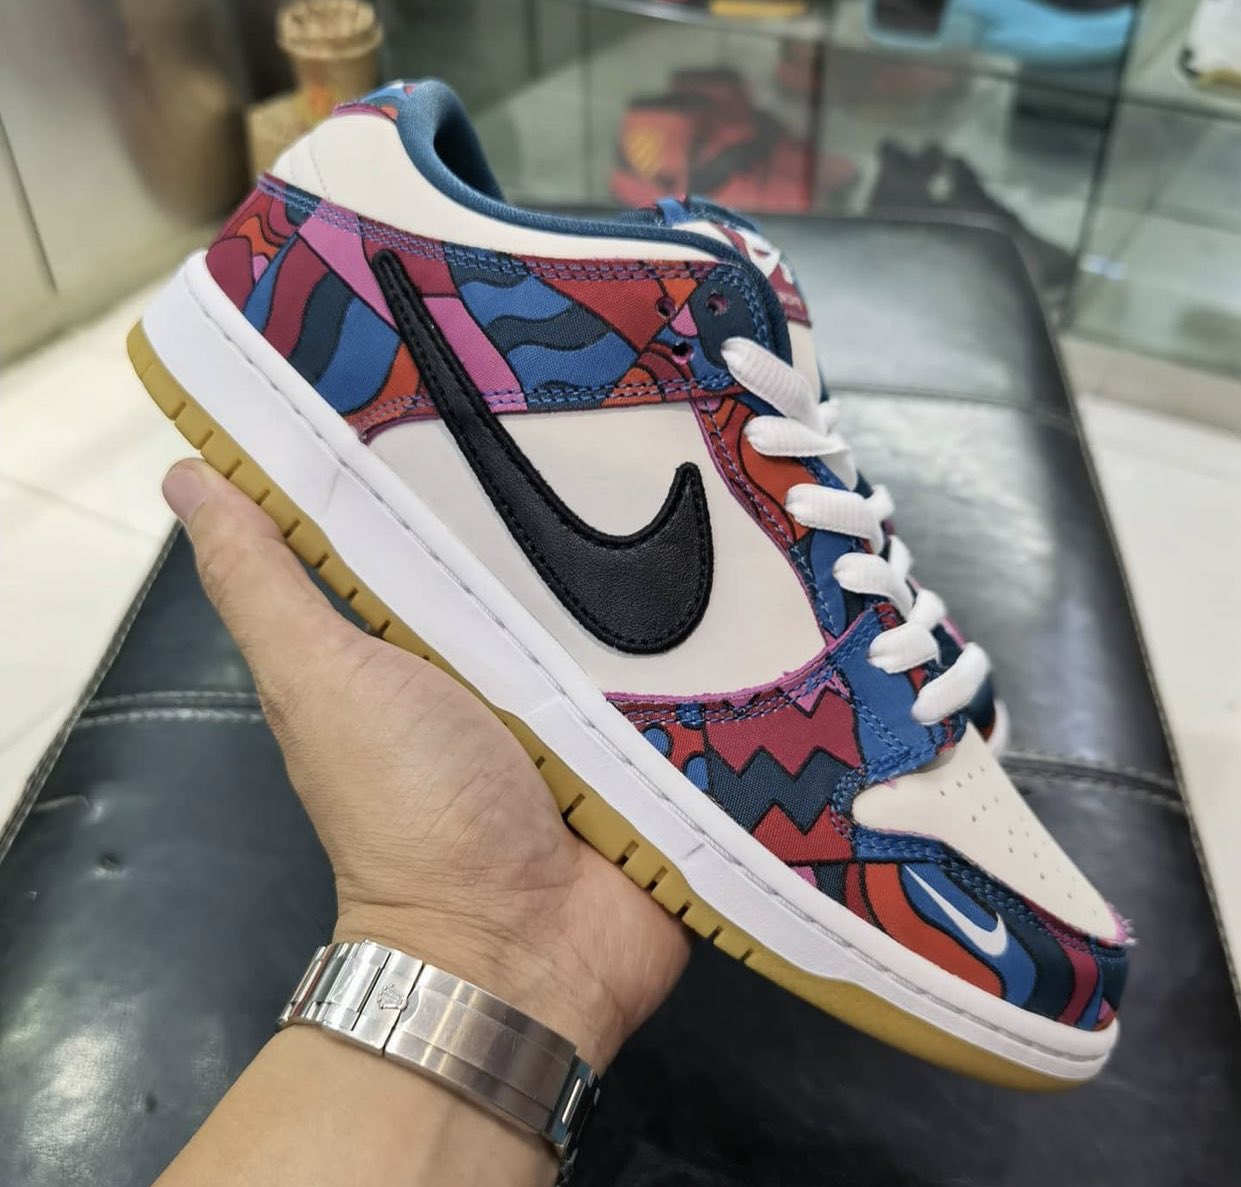 More images of the Parra x Nike SB Dunk 